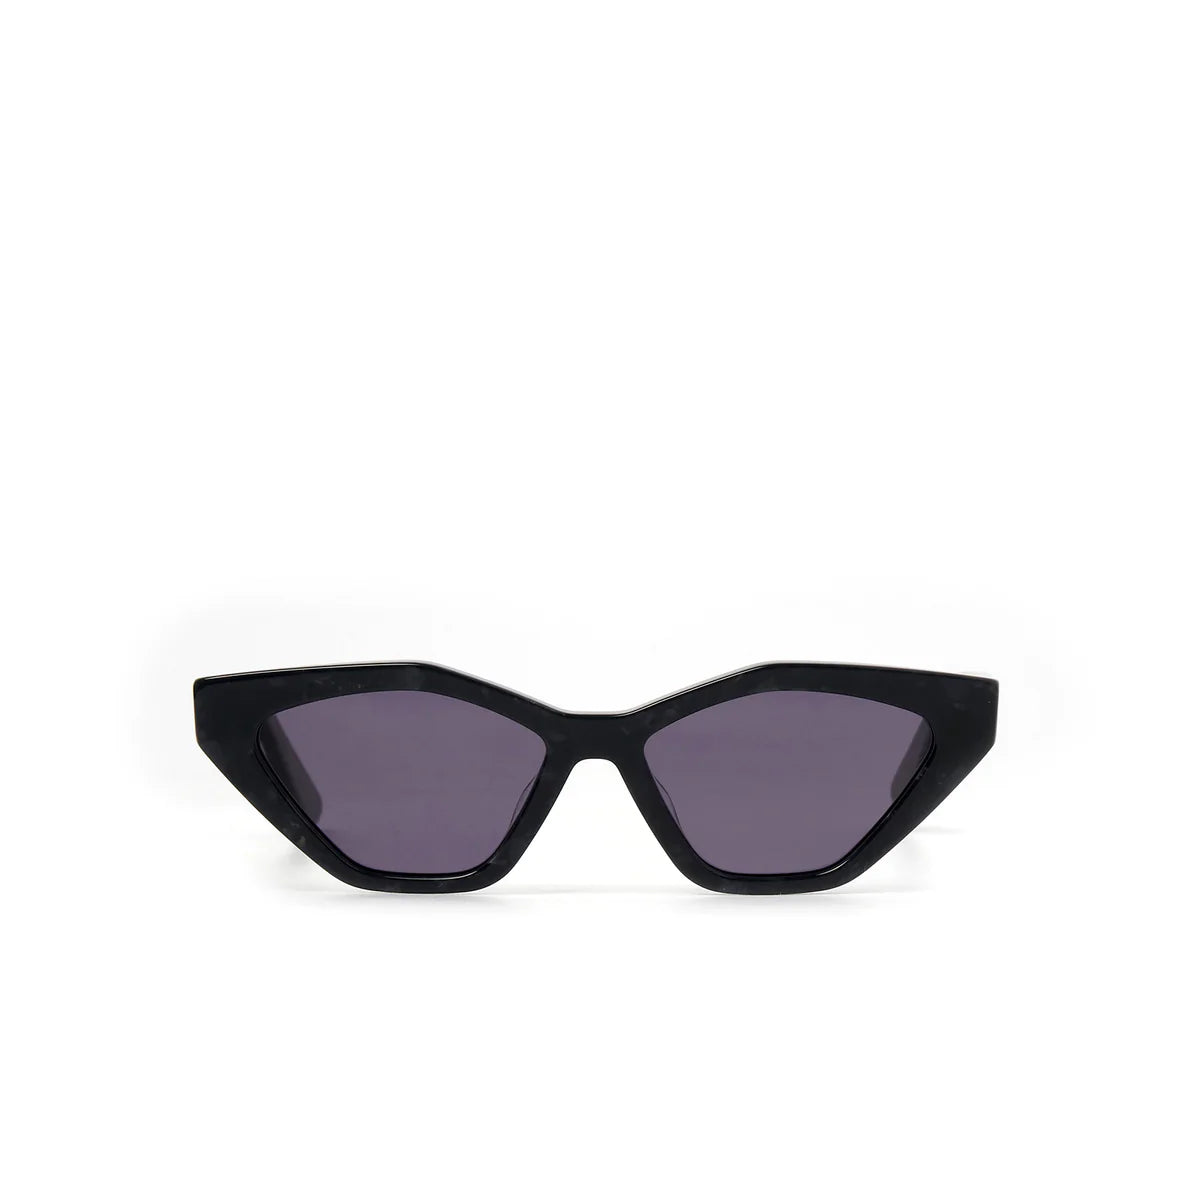 Arms of Eve Jagger Sunglasses - Graphite